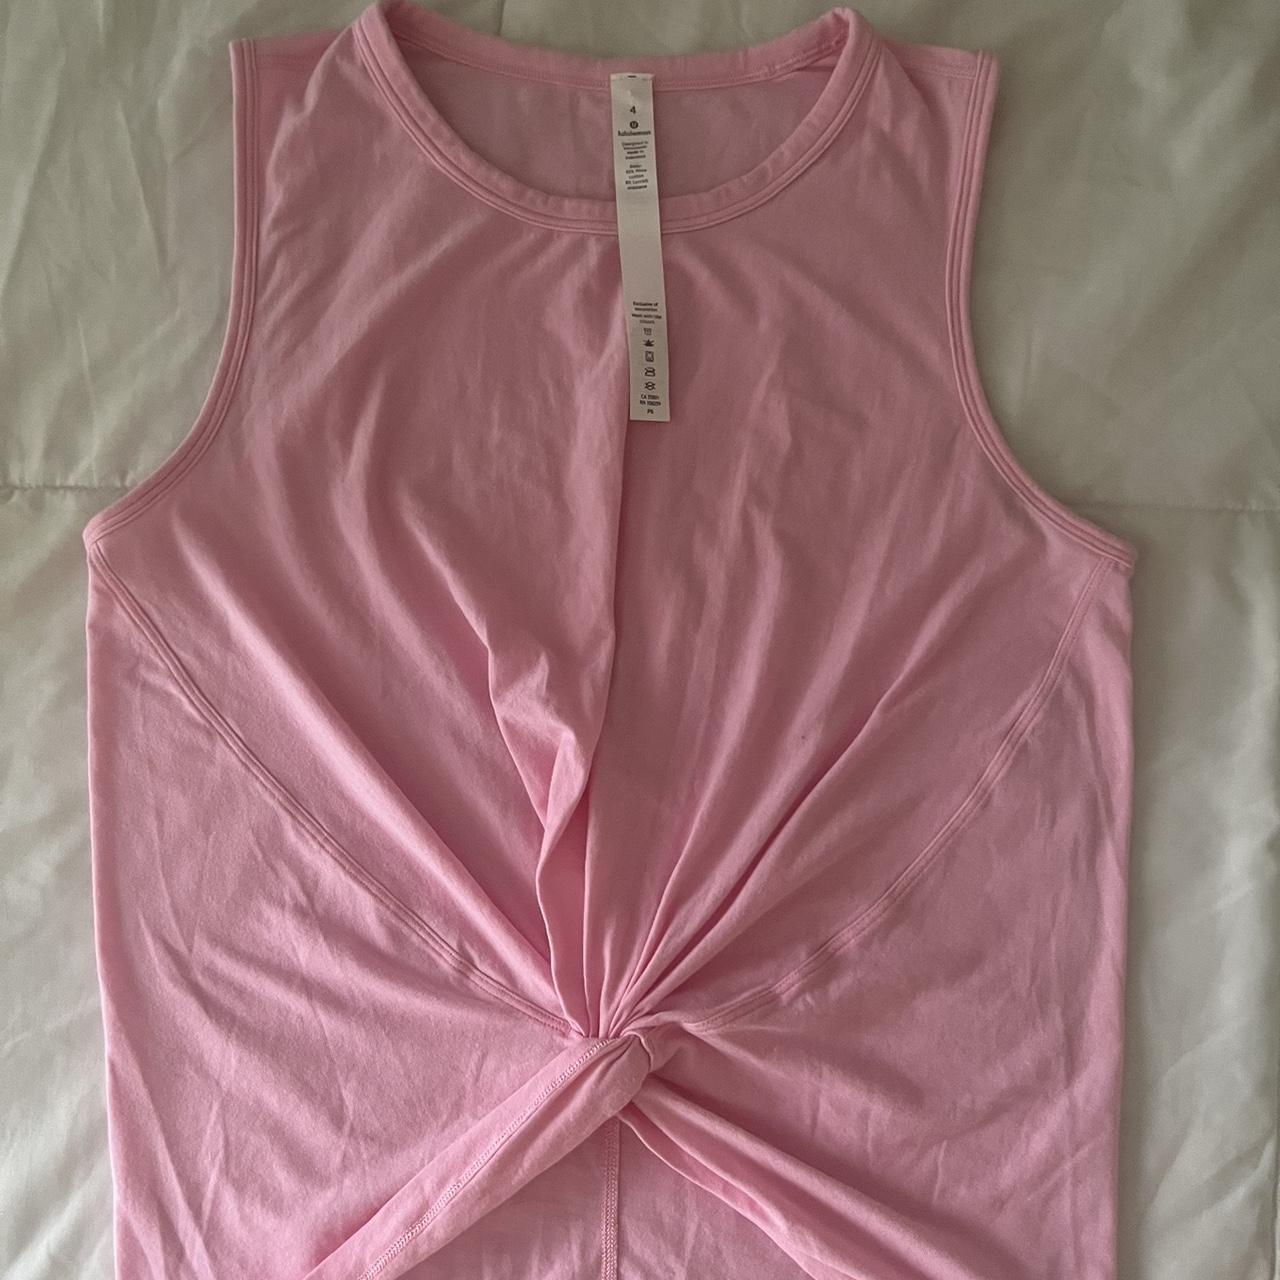 Lululemon size 4 pink work out tank top! almost